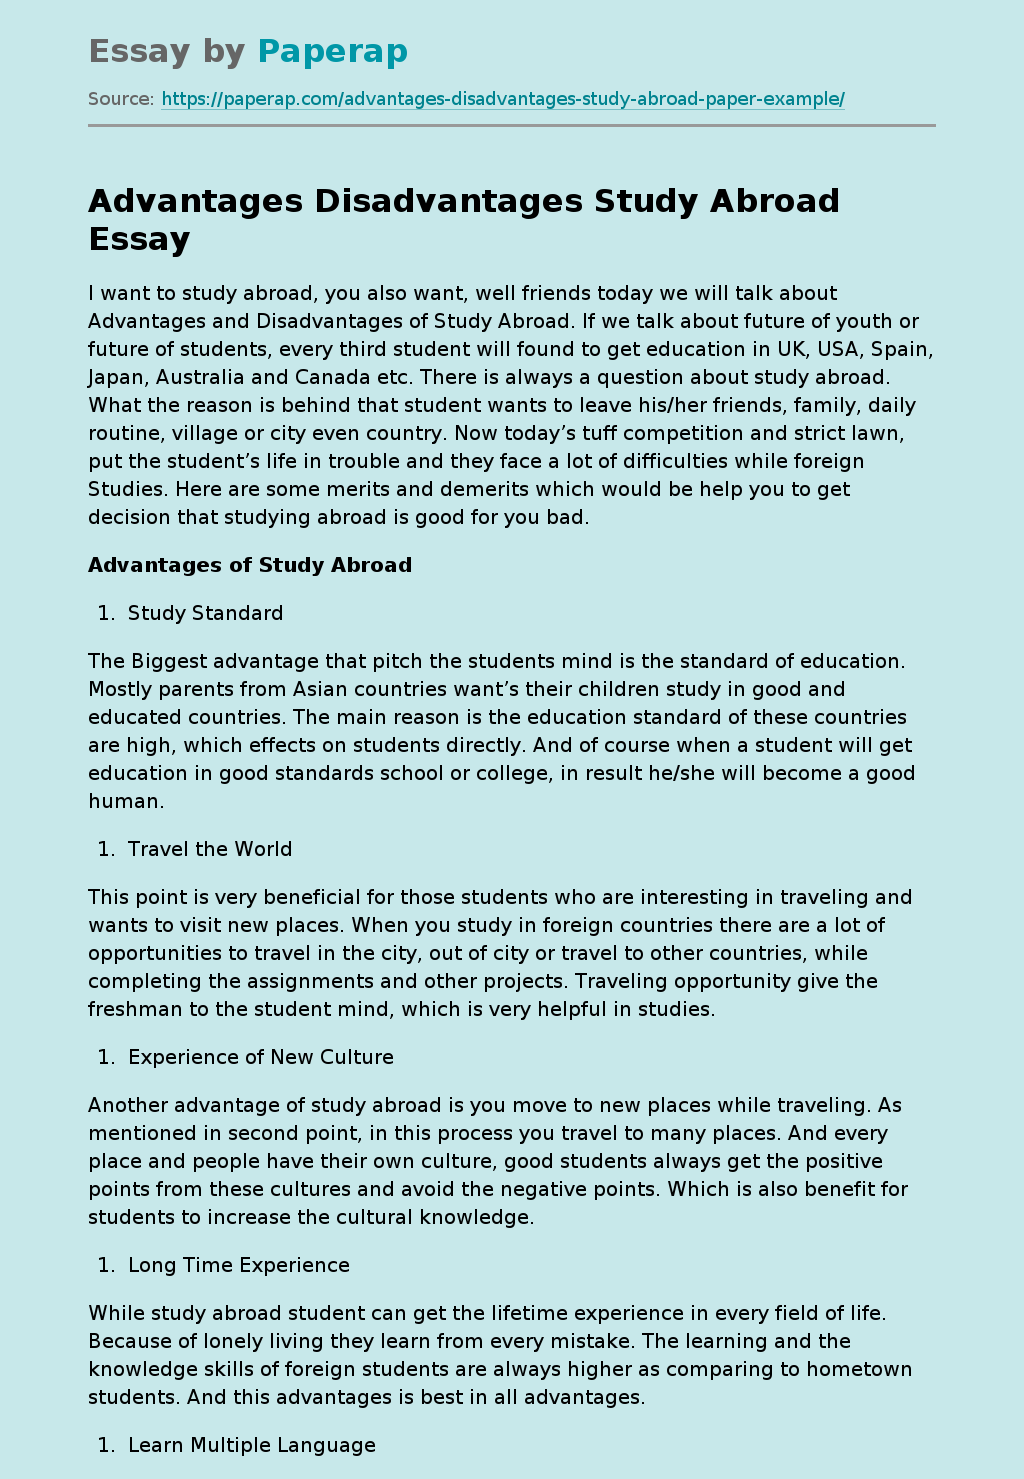 difficulties of studying abroad essay